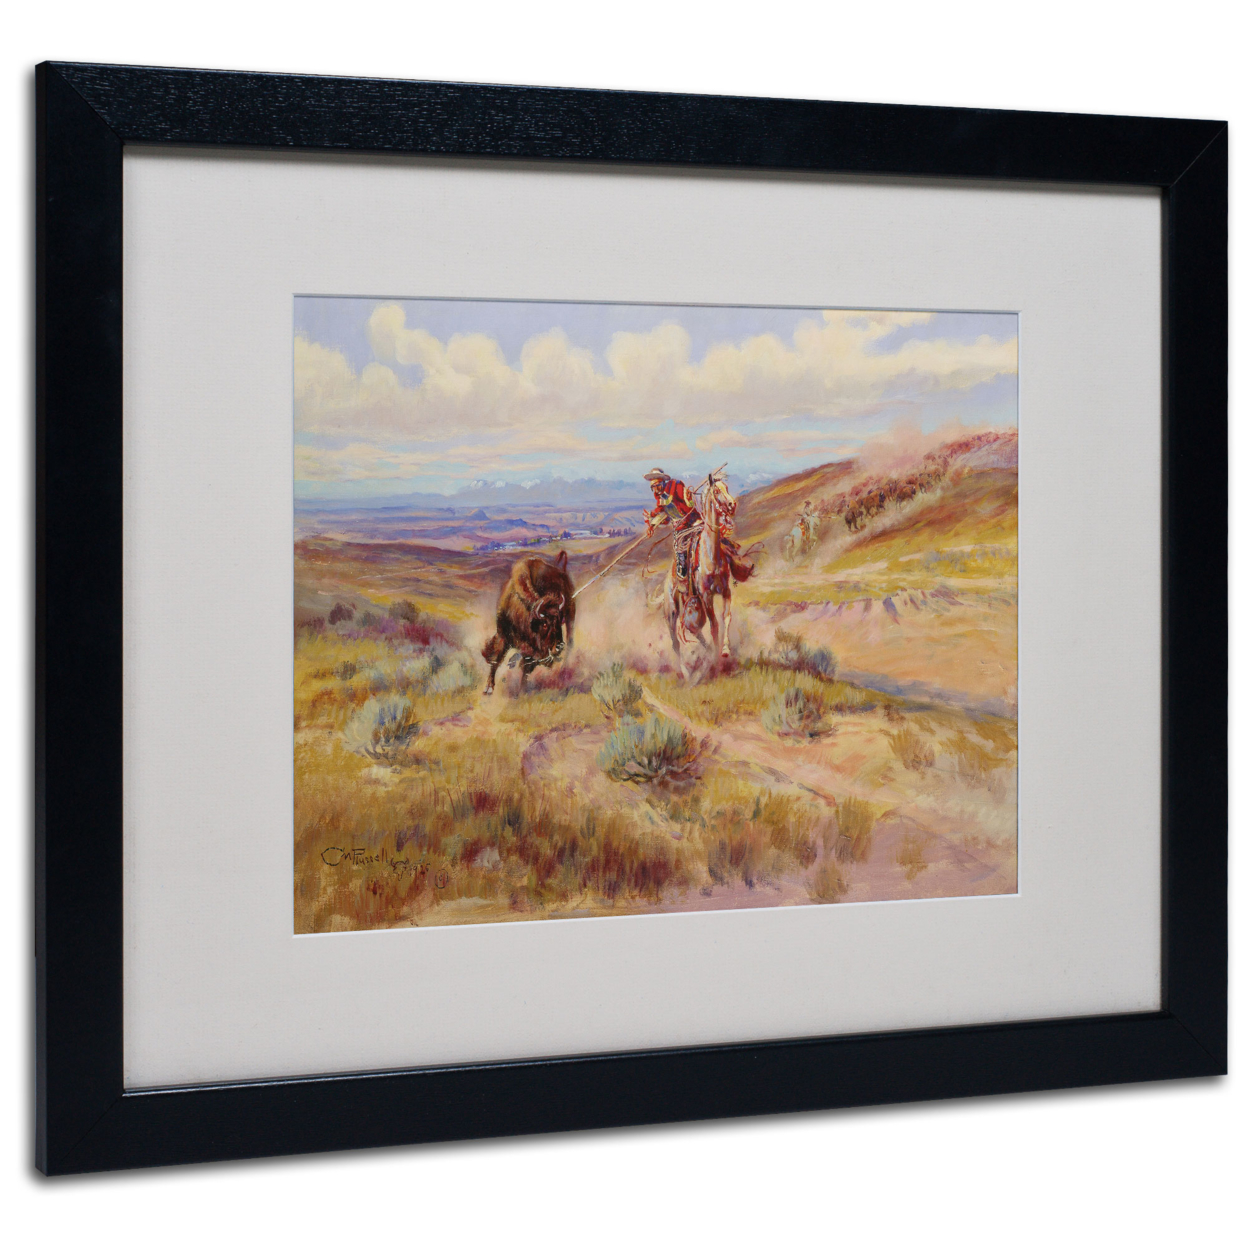 Charles Russell 'Spearing A Buffalo 1925' Black Wooden Framed Art 18 X 22 Inches